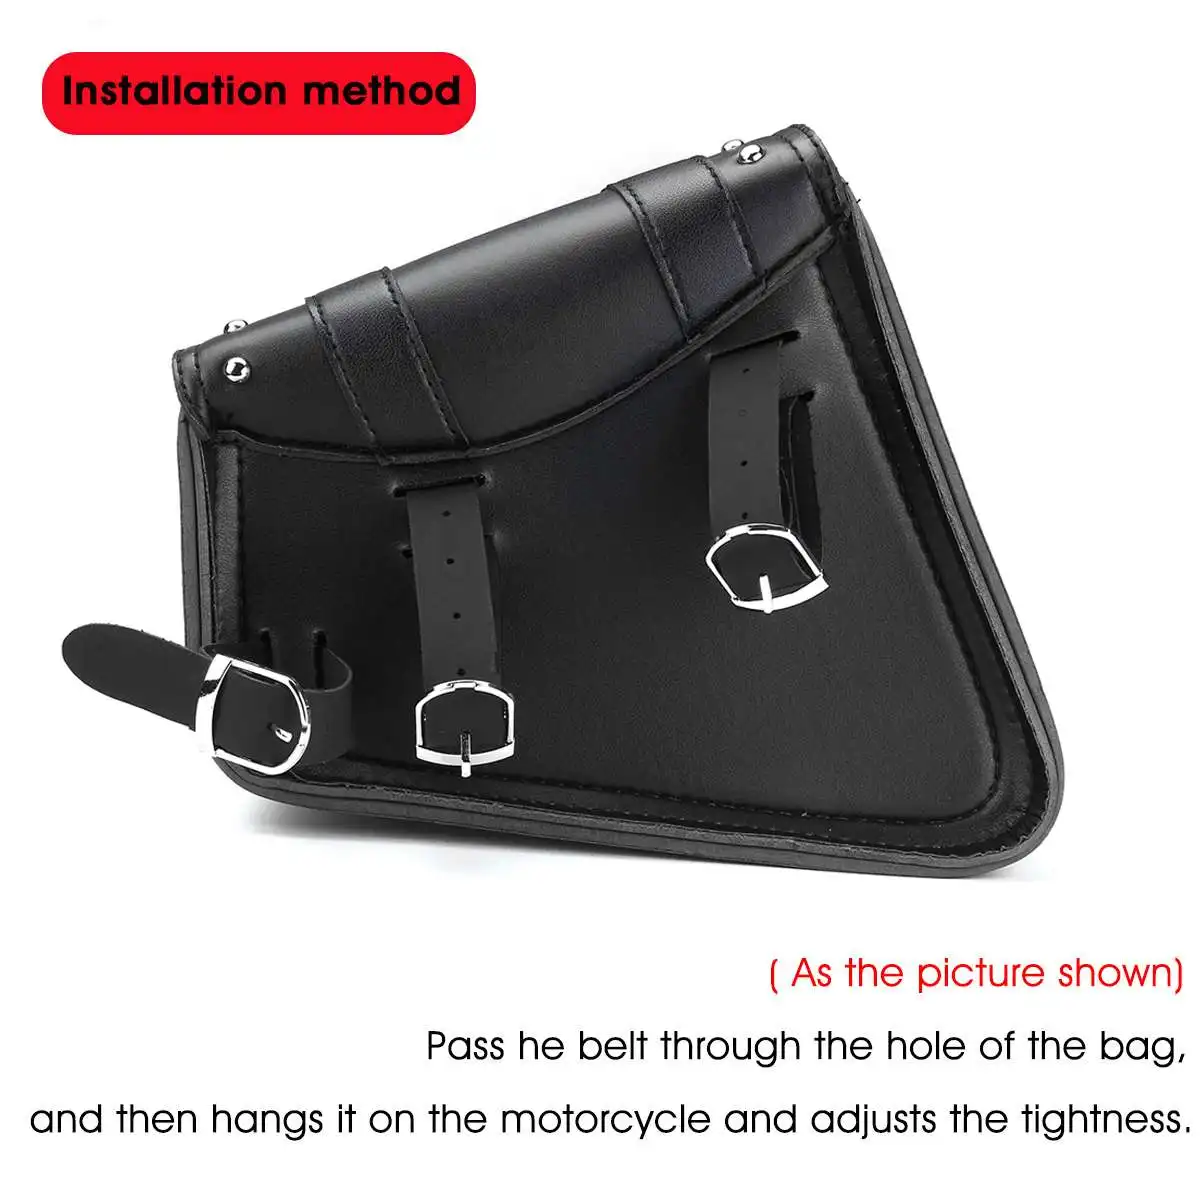 

New Motorcycle Studded Saddlebags Cafe Racer Side Tool Bags Luggage Storage Pouch Waterproof PU Leather Saddle Bags Black